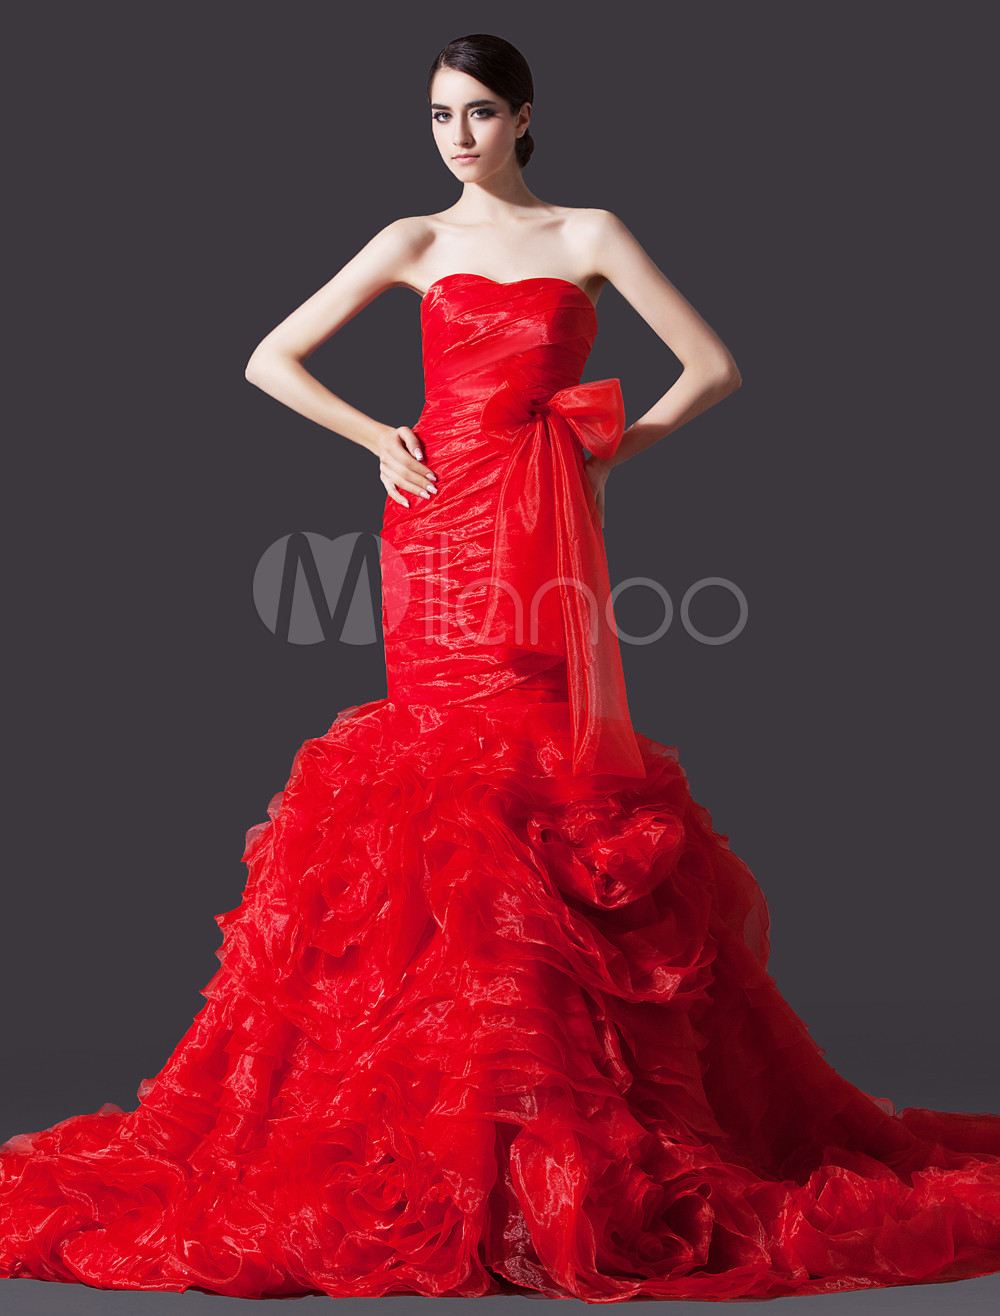 Red Mermaid Wedding Dress
 Red Mermaid Sweetheart Neck Strapless Ruched Bridal